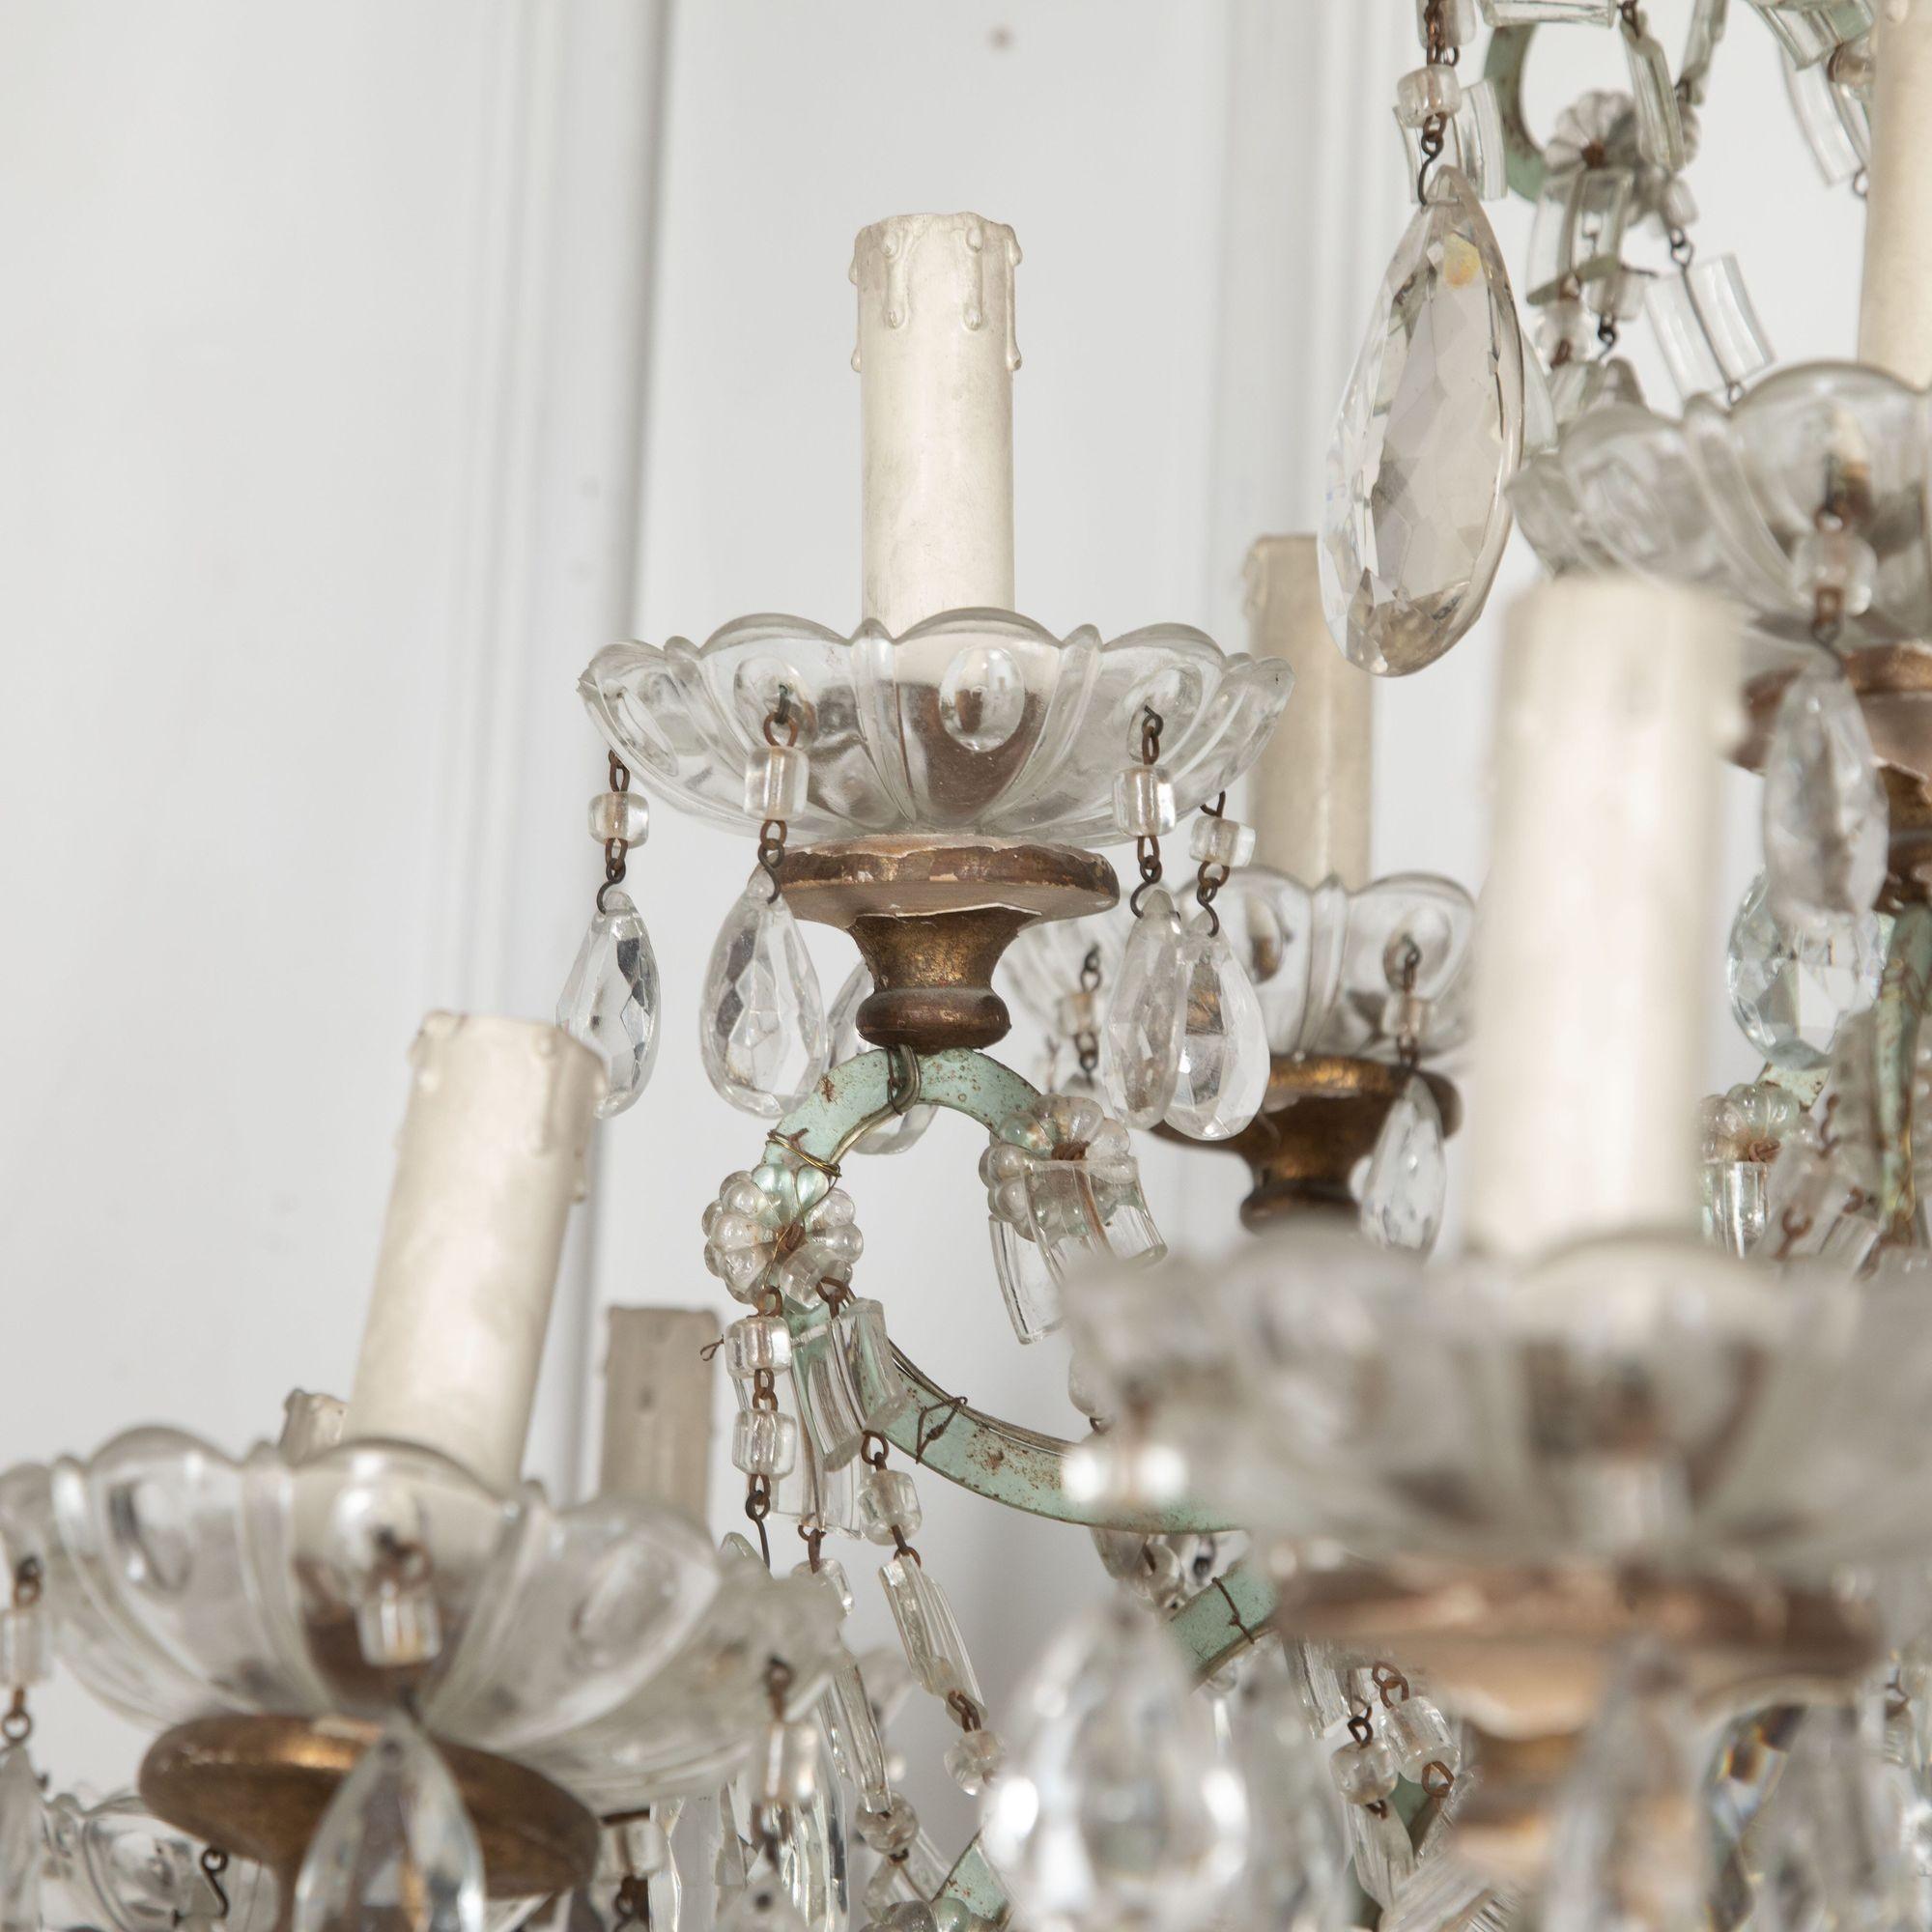 Impressive Italian Louis XV-style cut-glass chandelier.
With a subtle Eau De Nil iron frame. The many arms are joined by layers of intersecting swags of flat crystals and beads.
With a turned giltwood finial to the center, top, and beneath each